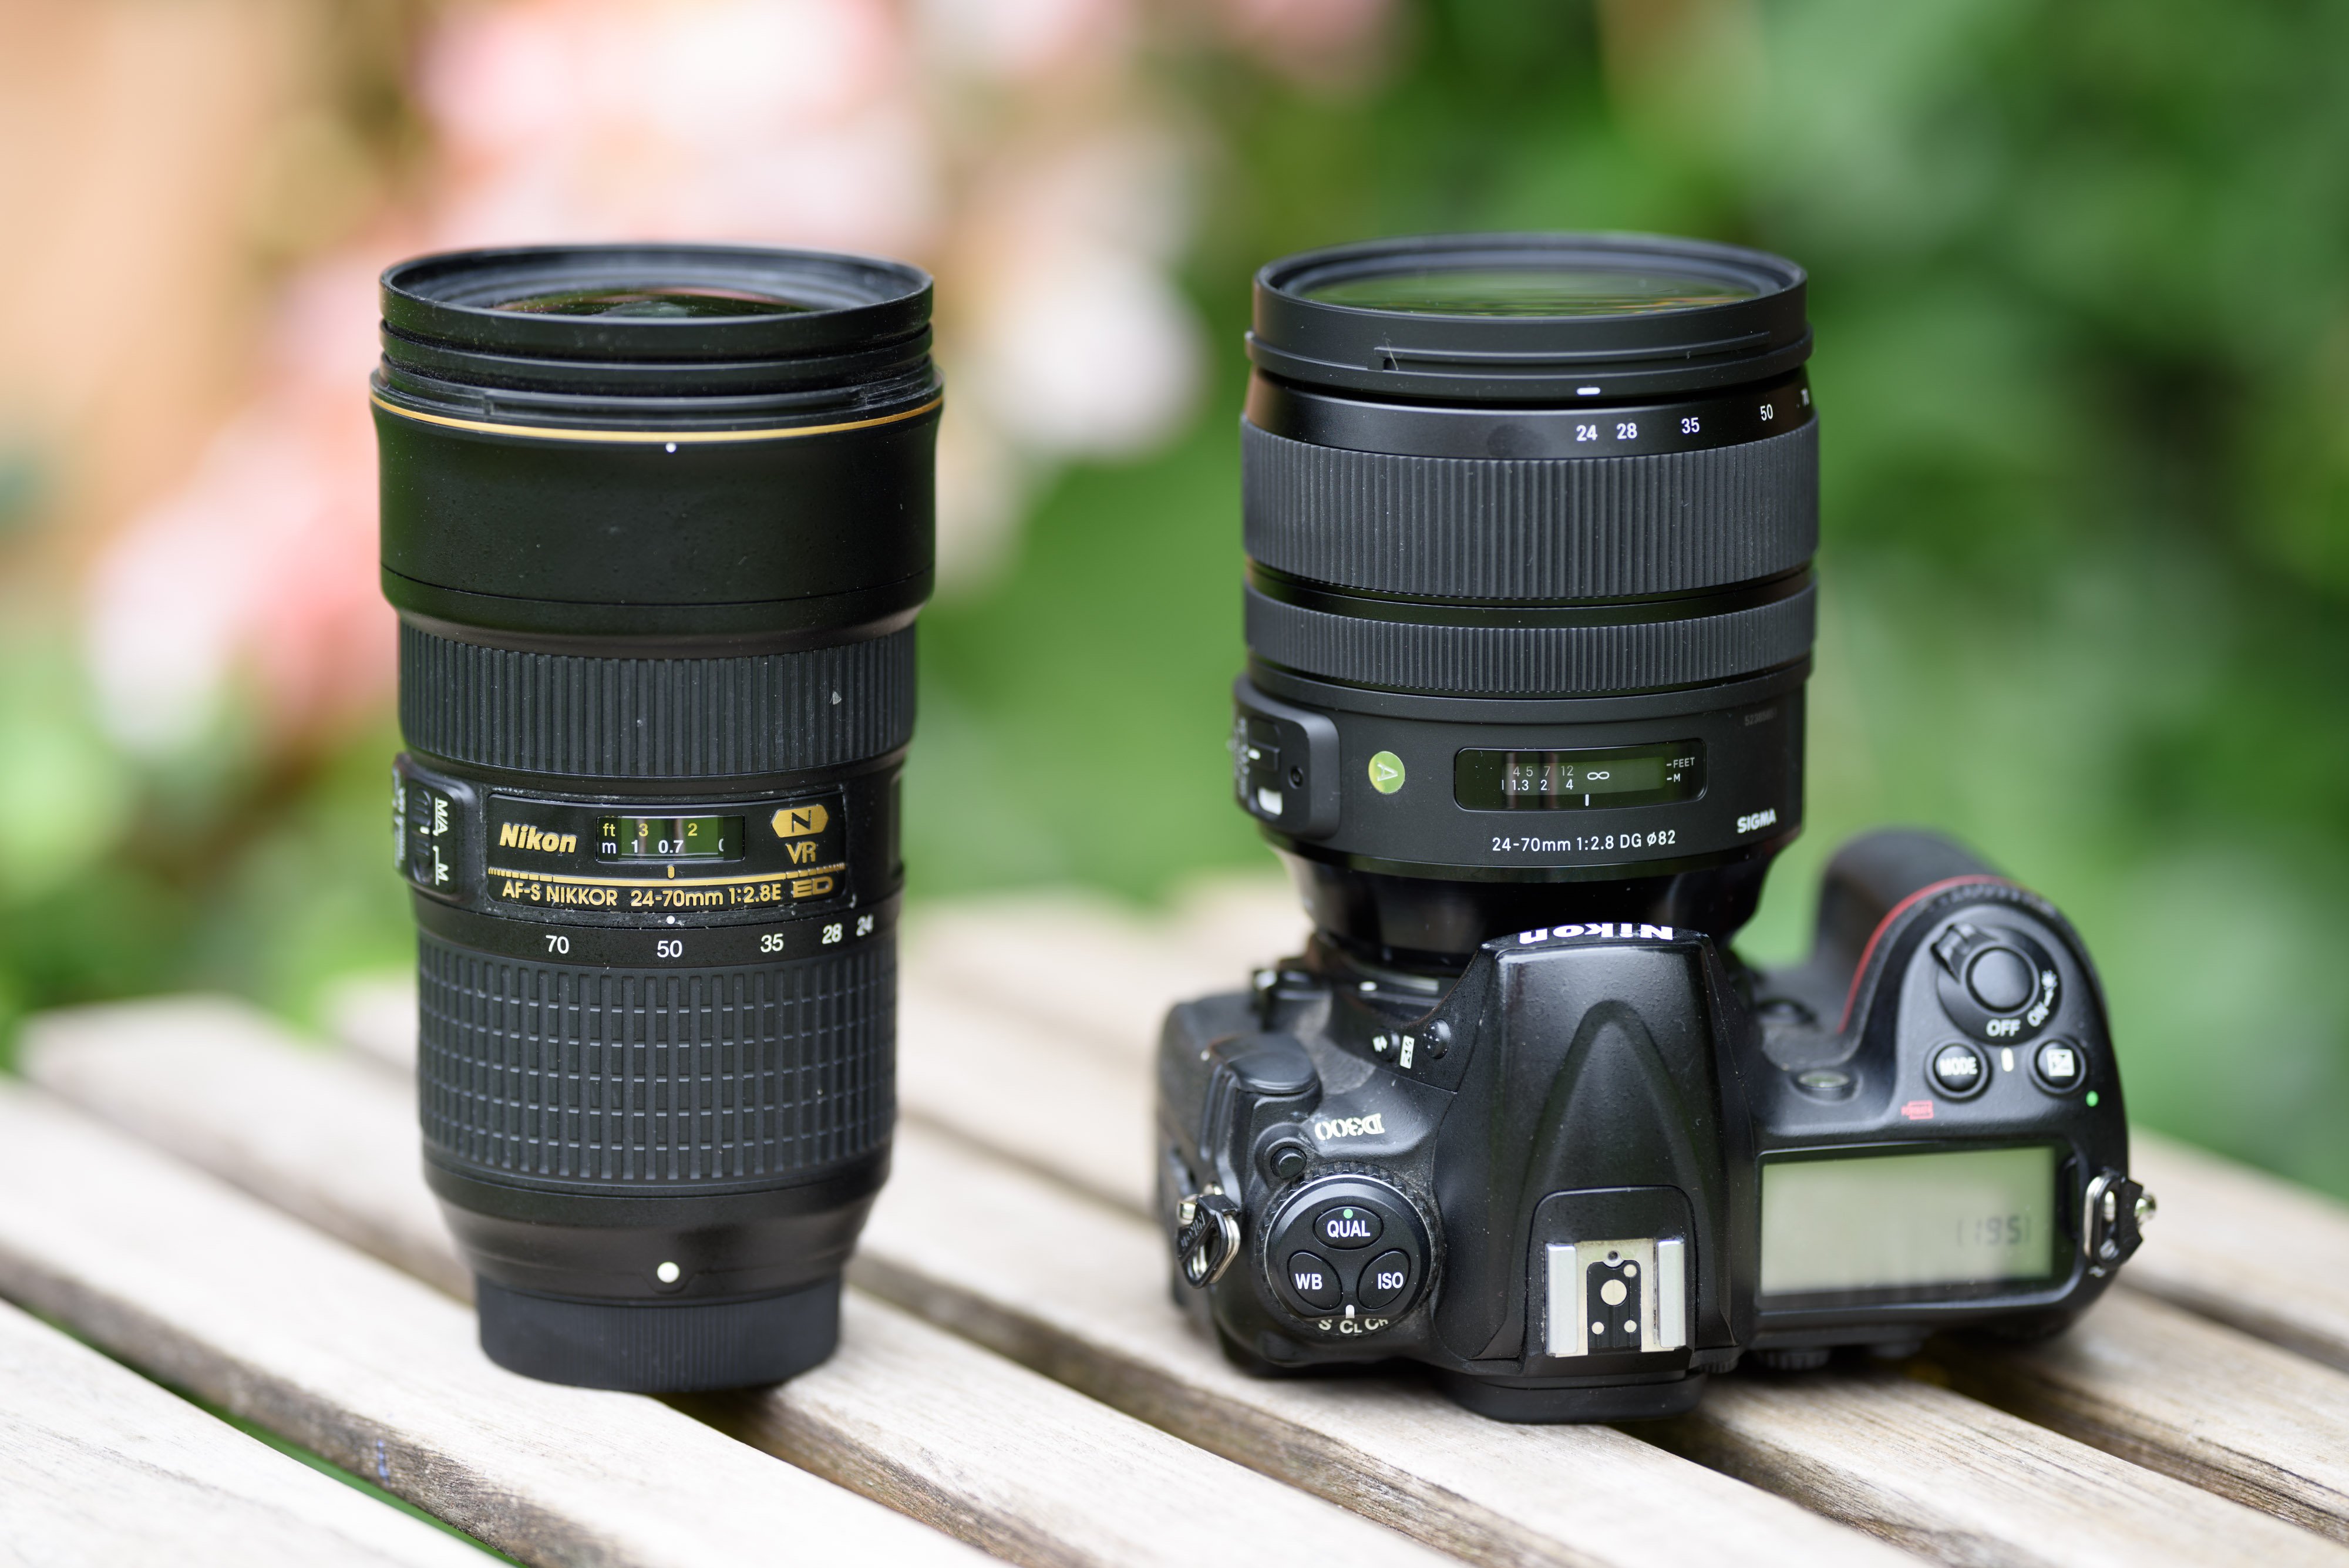 Sigma 24-70mm f2.8 OS Art review | Cameralabs